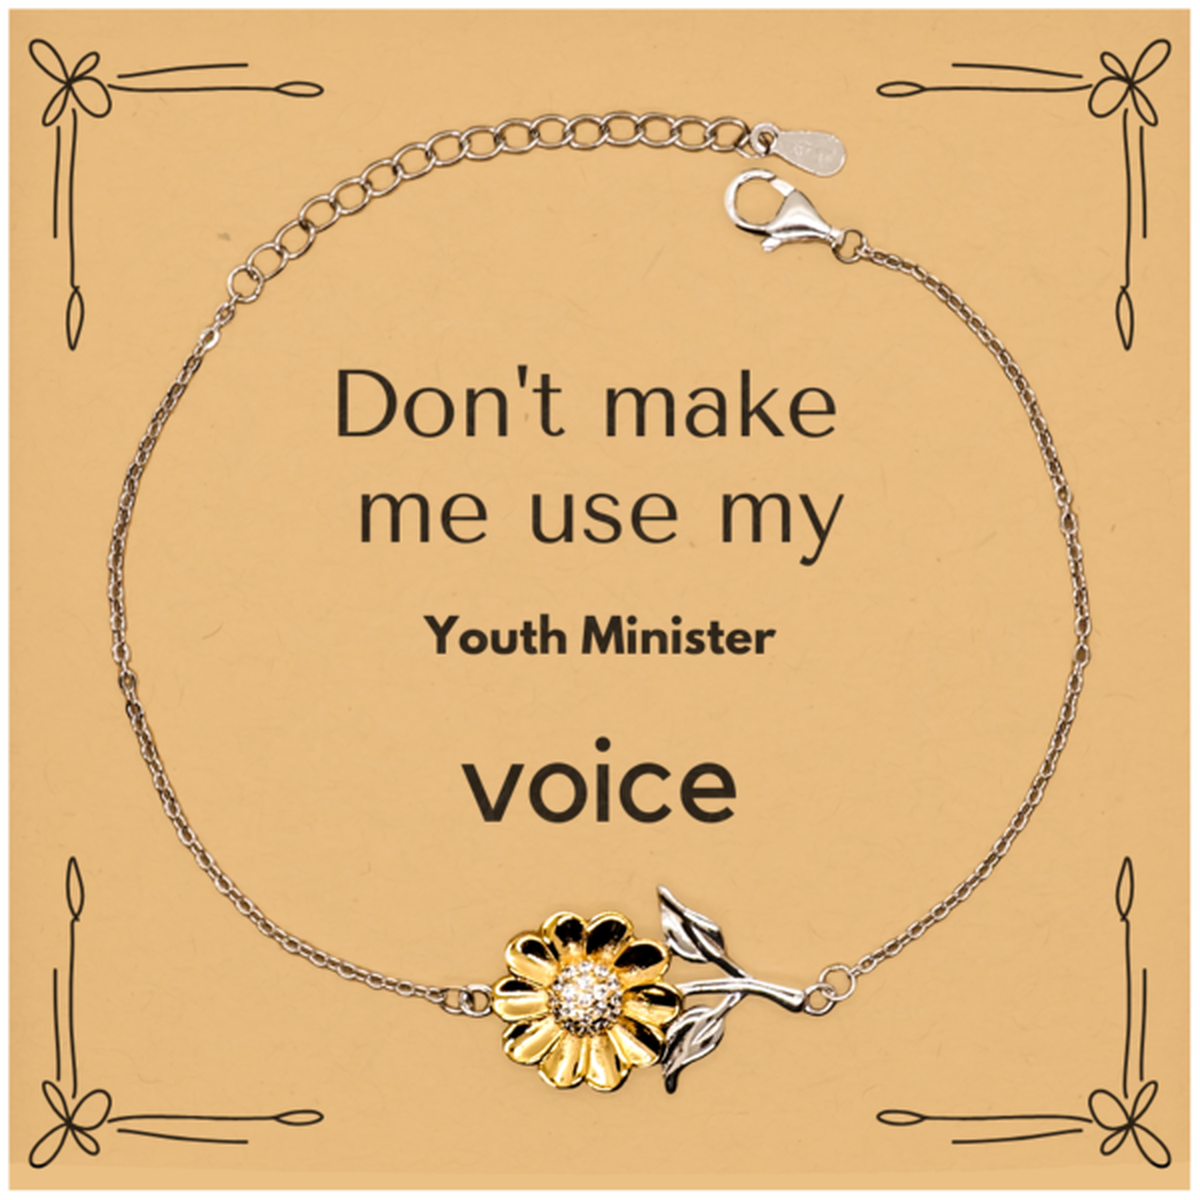 Don't make me use my Youth Minister voice, Sarcasm Youth Minister Card Gifts, Christmas Youth Minister Sunflower Bracelet Birthday Unique Gifts For Youth Minister Coworkers, Men, Women, Colleague, Friends